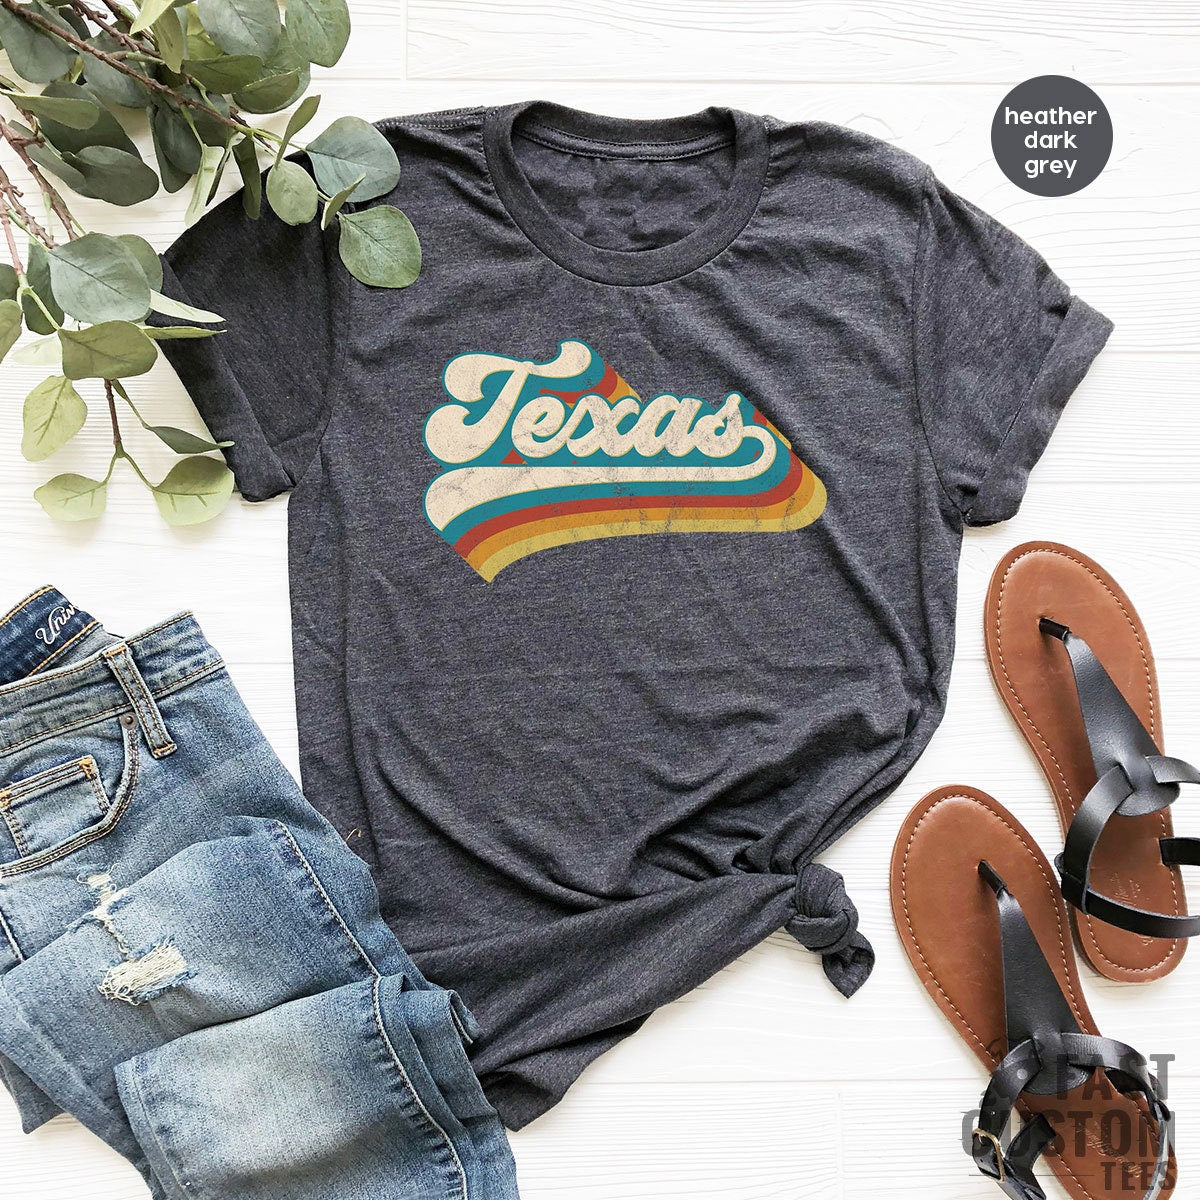 Vintage Texas Shirt, Texas Fan Shirt, Vintage T Shirt, Game Day Shirts, College Student Gifts, State Shirts, Texas T-Shirt - Fastdeliverytees.com